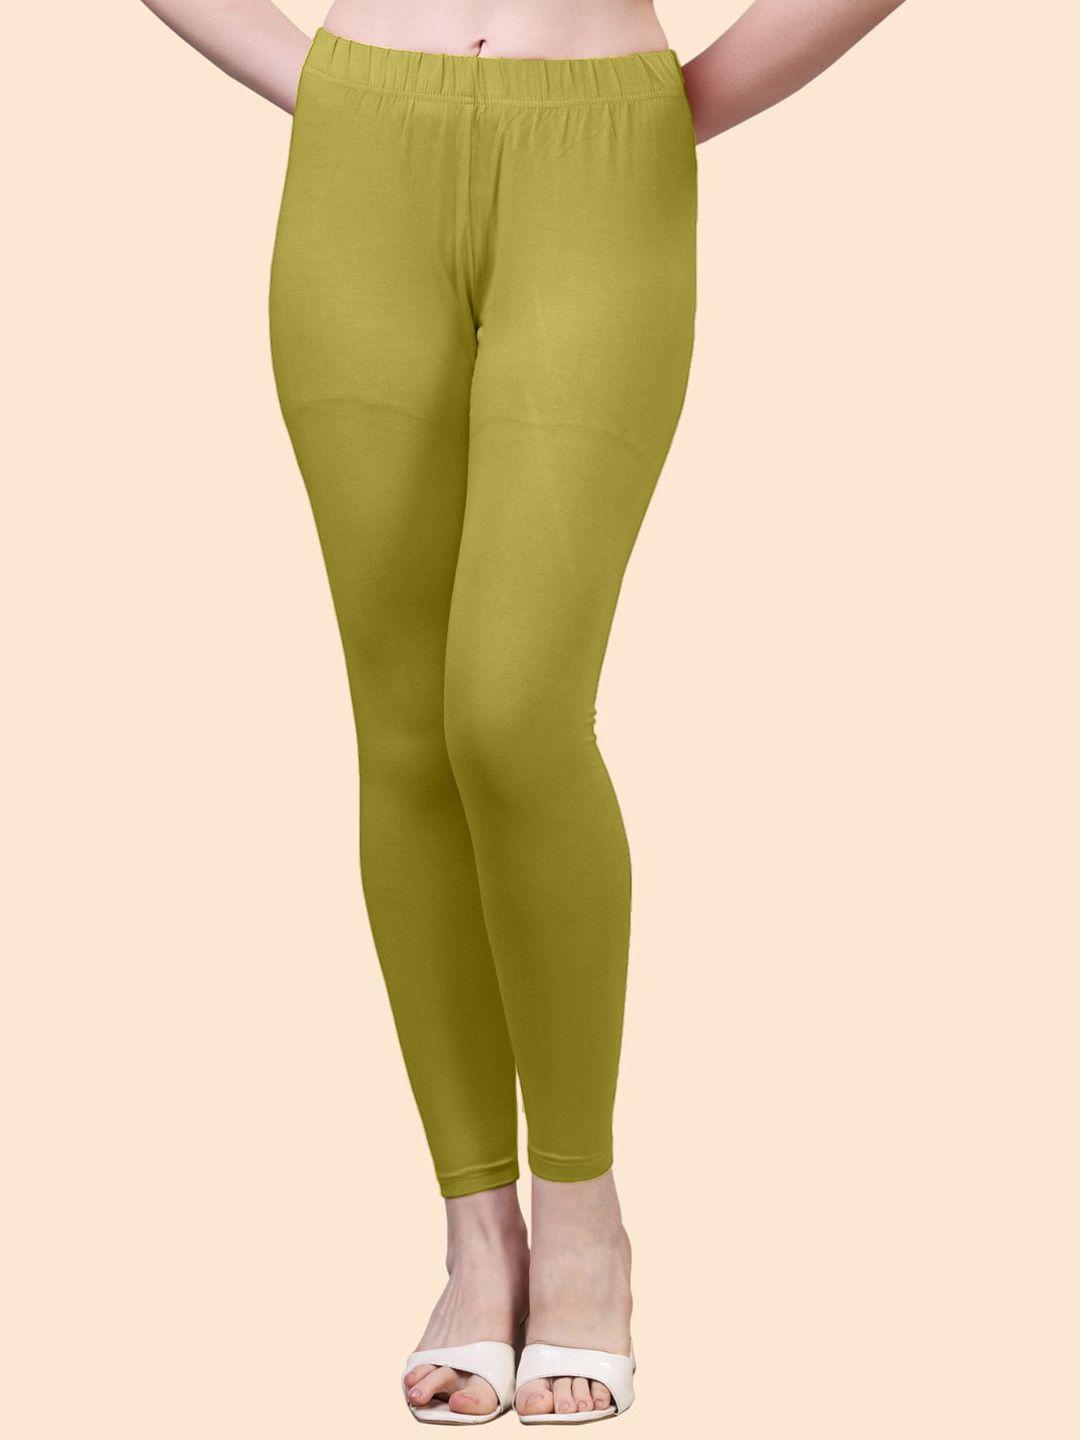 here&now cotton ankle length leggings